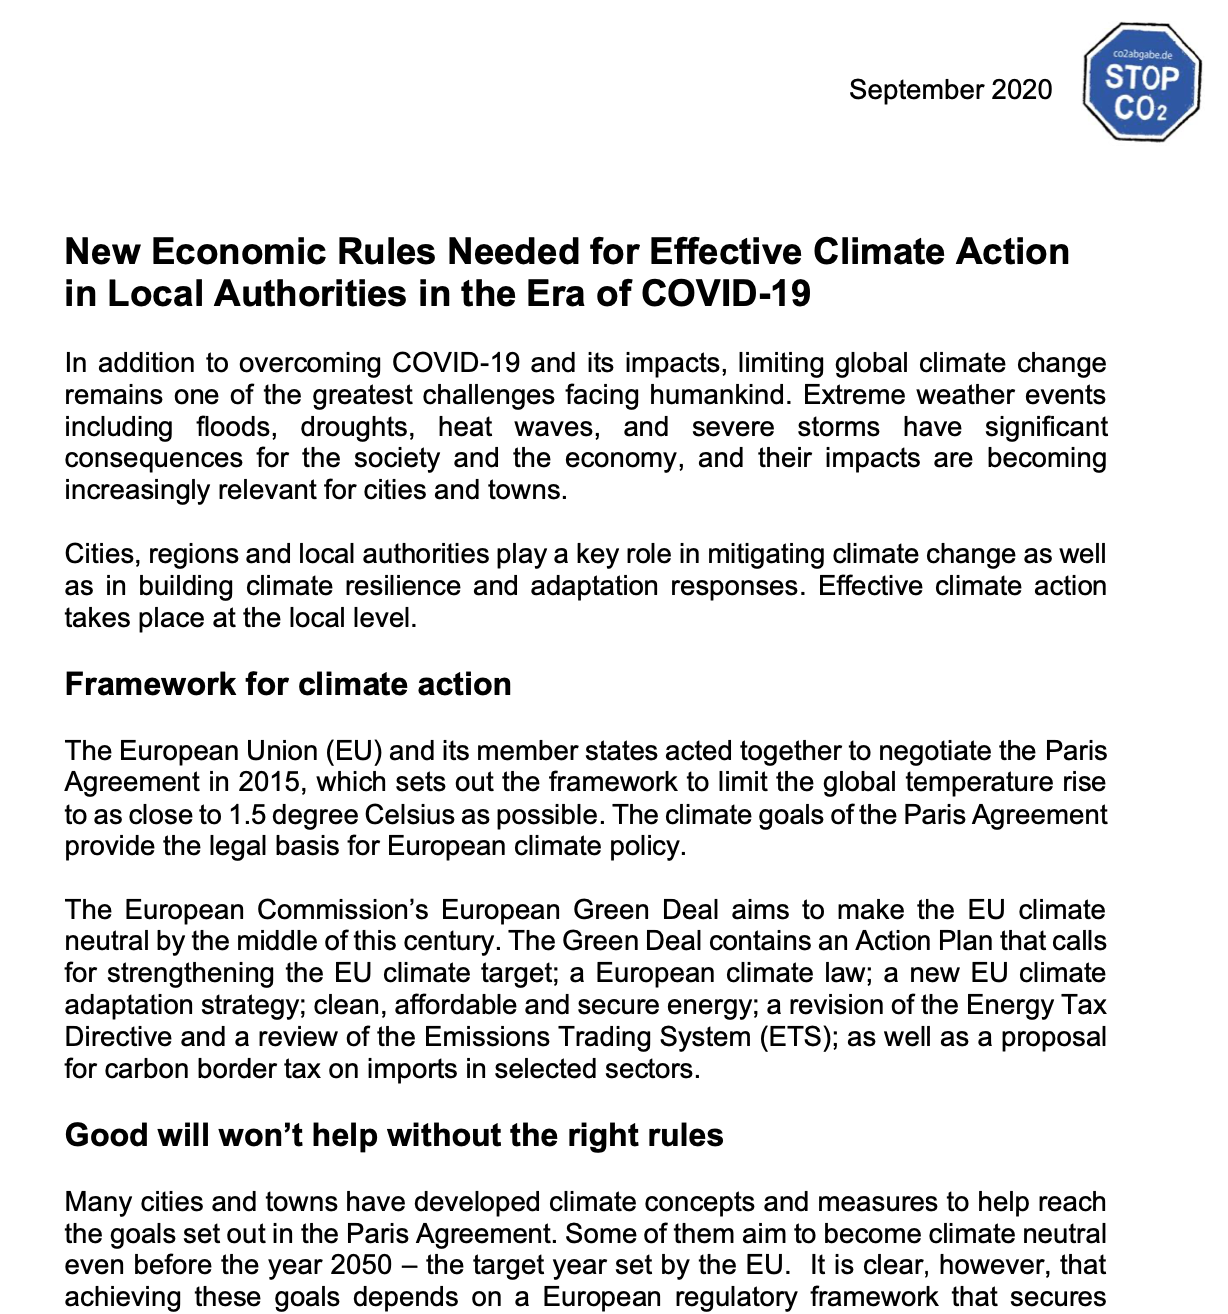 New Economic Rules Needed for Effective Climate Action in Local Authorities in the Era of COVID-19